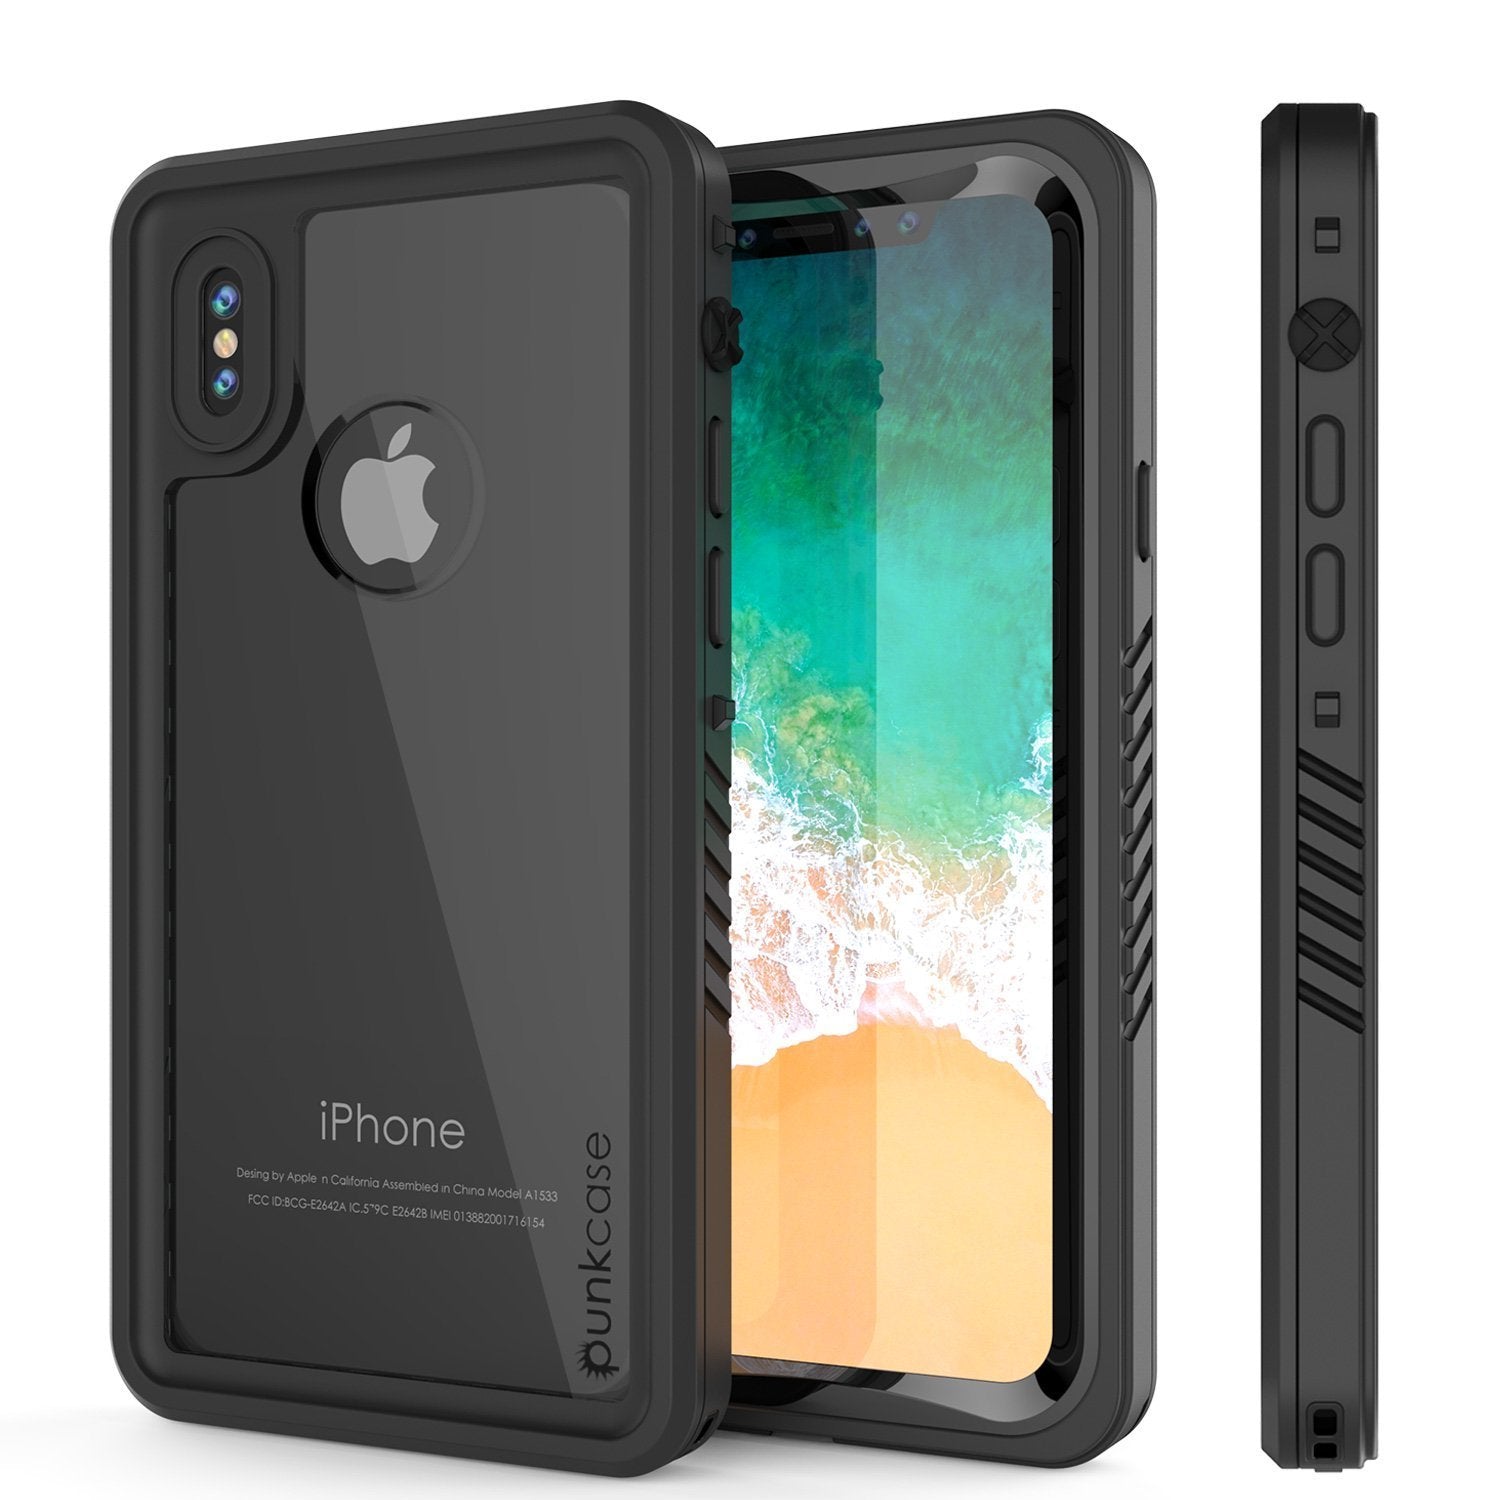 iPhone XS Max Waterproof Case, Punkcase [Extreme Series] Armor Cover W/ Built In Screen Protector [Black] (Color in image: Black)